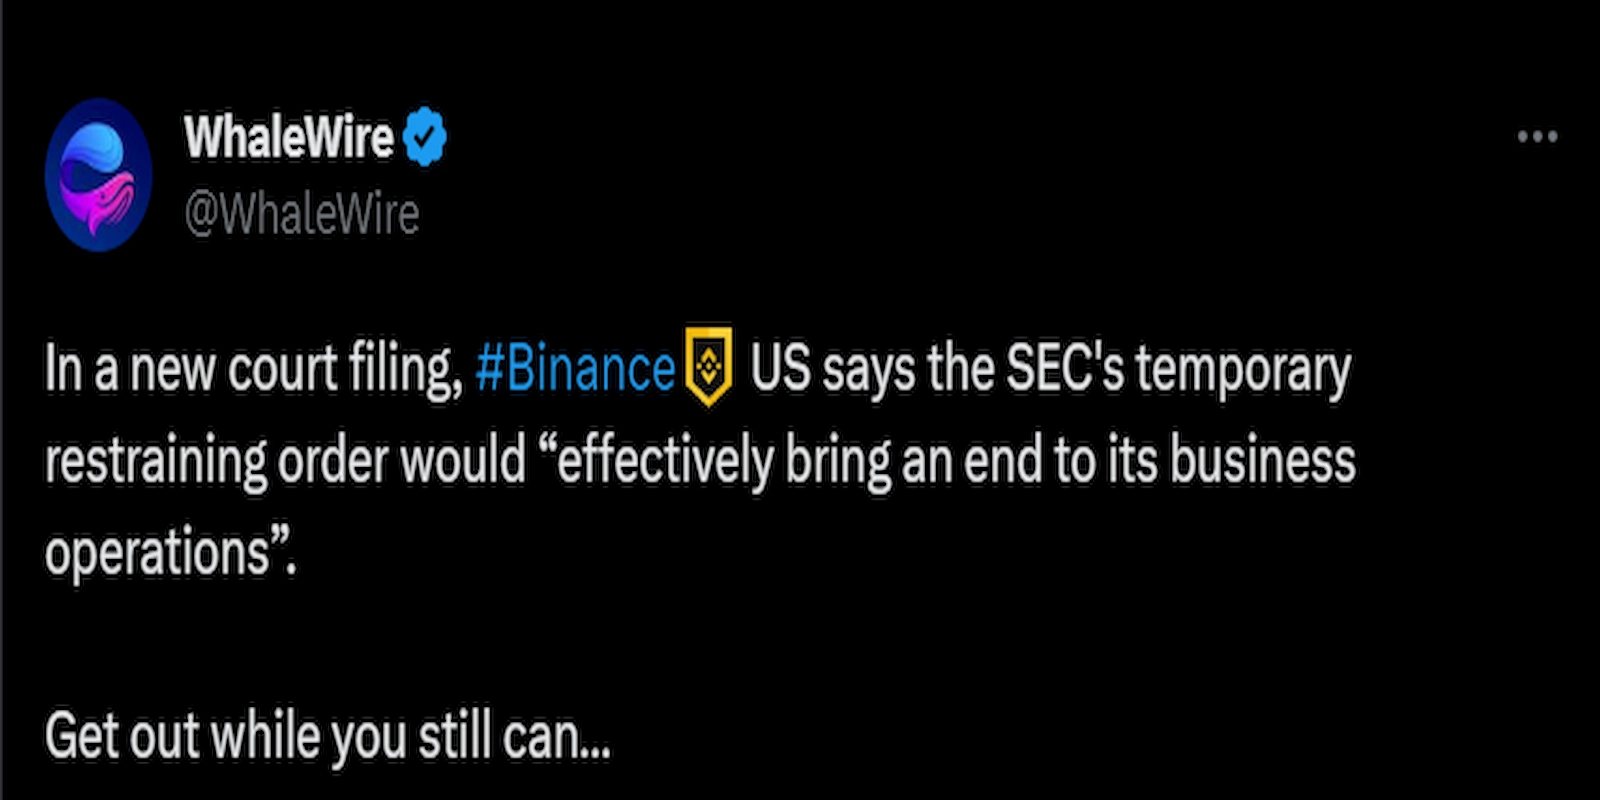 Binance.US's filing against the SEC has served to increase the FUD in the market.